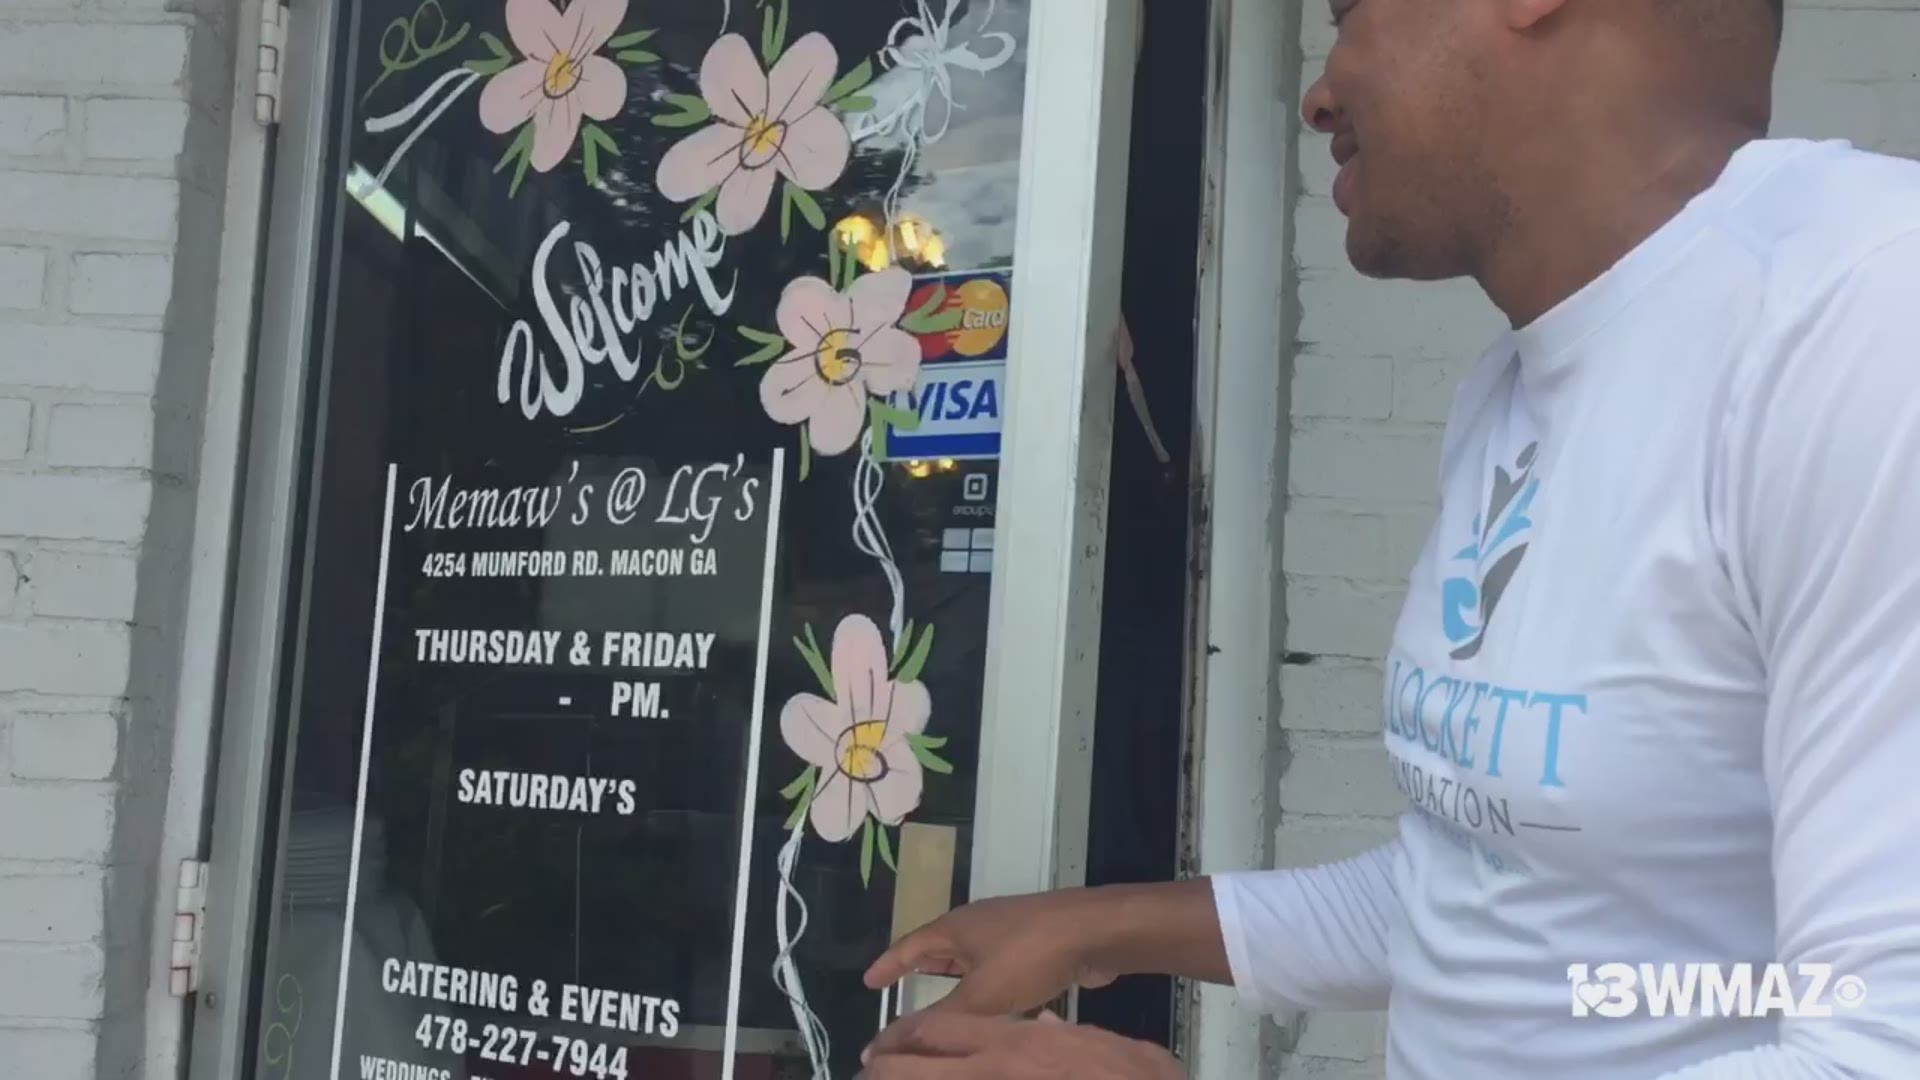 MeMaw?s legacy remains alive after her son, Richard Lockett jr., and husband Richard Lockett Senior, reopen MeMaw?s restaurant in Macon, and hand out bags of food to the community